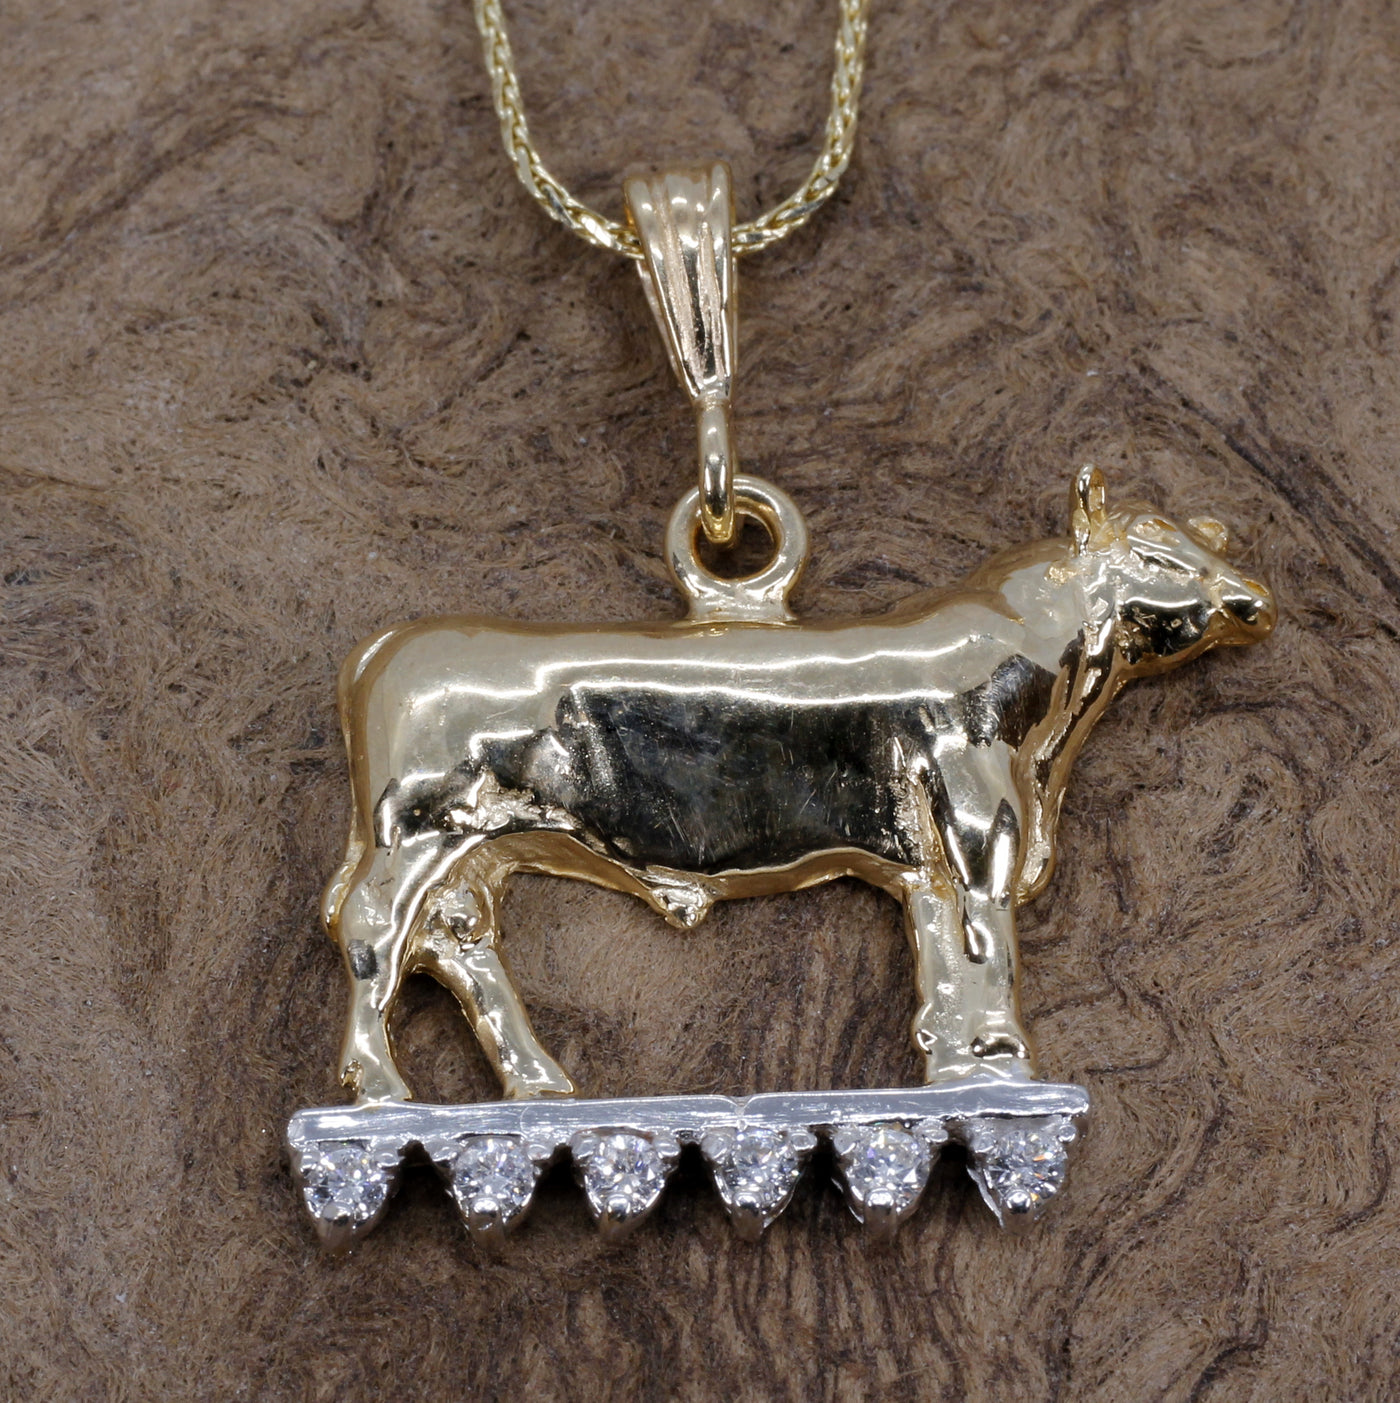 Prize Angus Necklace in Solid 14kt gold on diamond lighted stage – Chaney